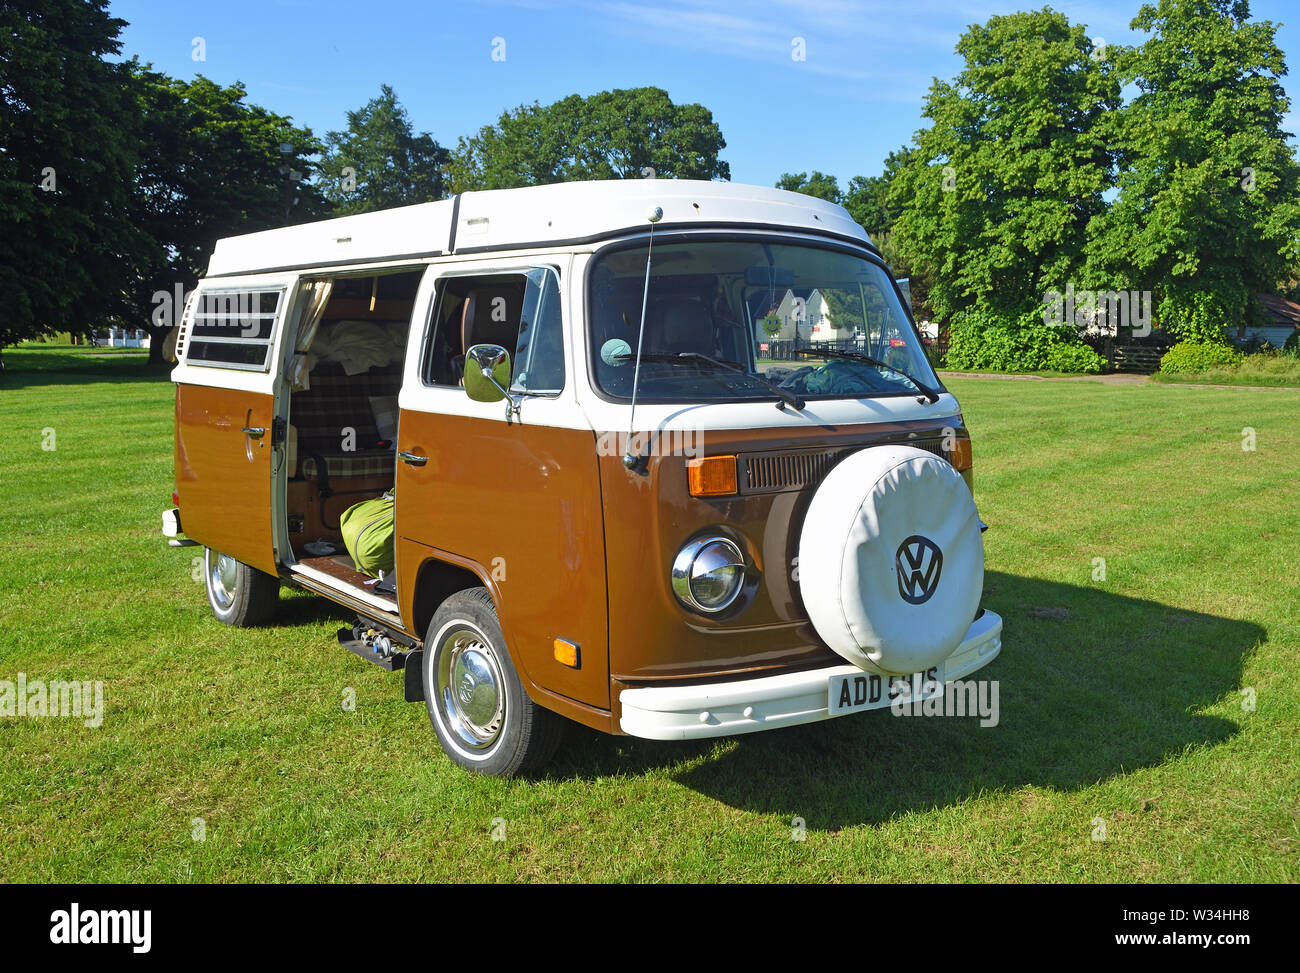 Classic Brown and White Volkswagen Car Parked on Village Green. Stock Photo